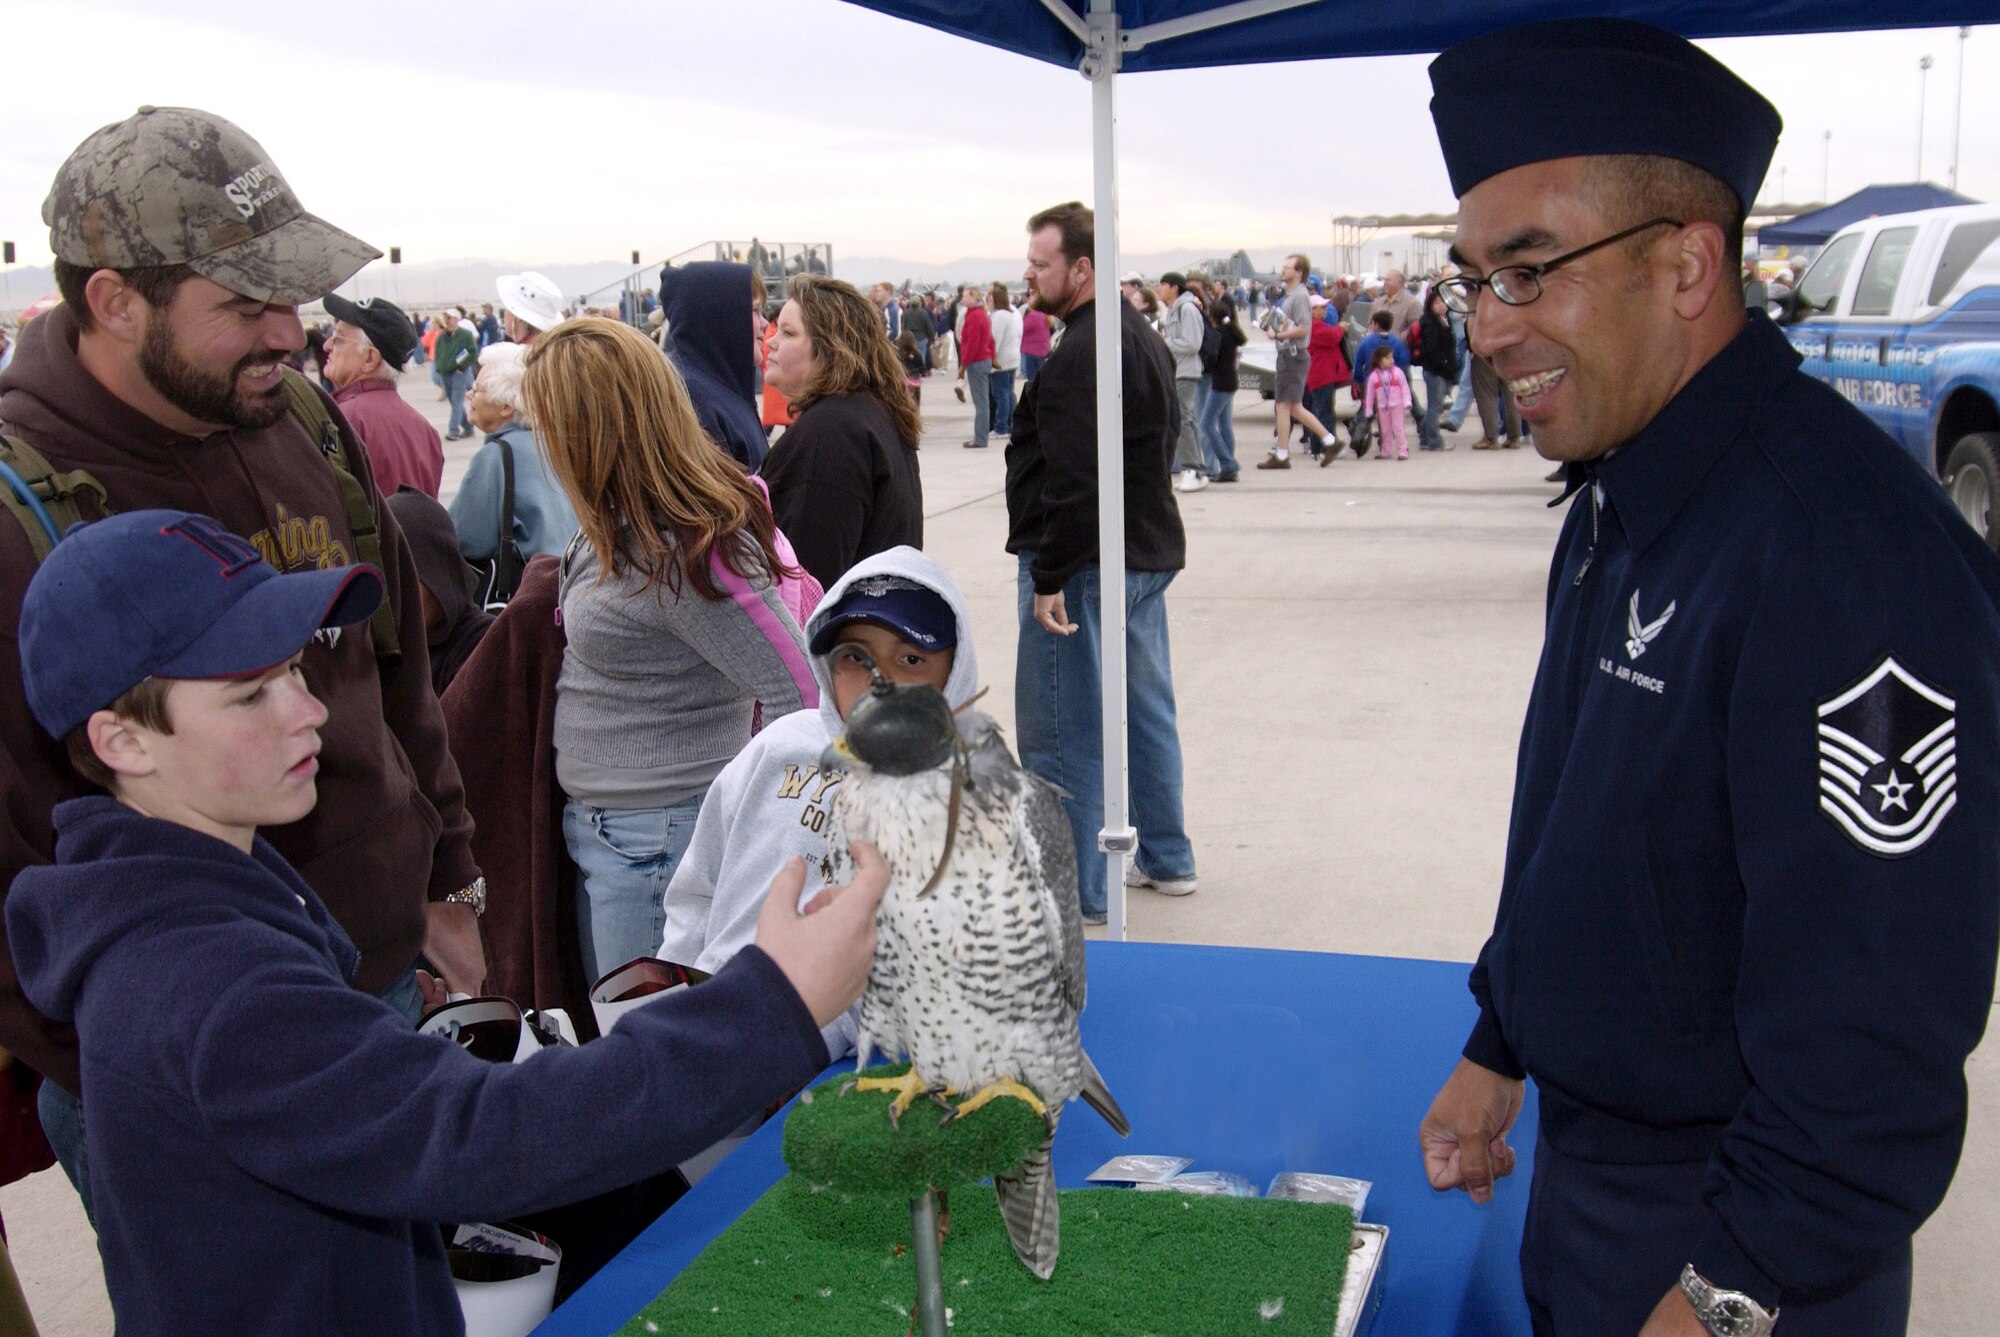 Master Sgt. Gino Mattorano of the U.S. Air Force Academy shows a young air show spectator a Falcon mascot named "Cody" Nov. 11 at Nellis Air Force Base, Nev. Aviation Nation 2006 is one of the largest aviation events in North America. The show was held Nov. 11 and 12. (U.S. Air Force photo/Master Sgt. Kevin J. Gruenwald)